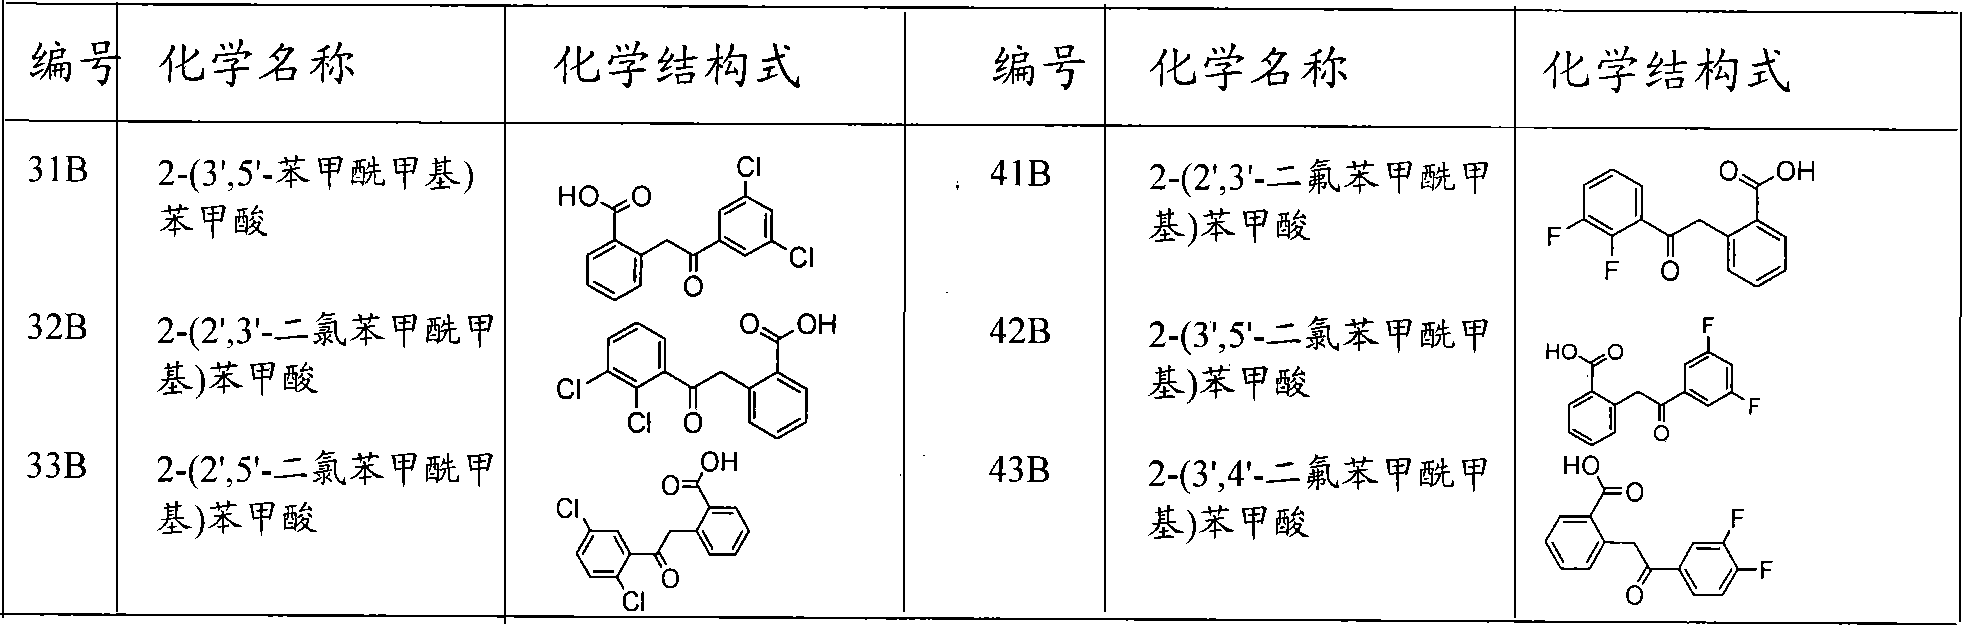 Preparation and usage of unnatural 3,4-dihydro isocoumarin derivatives